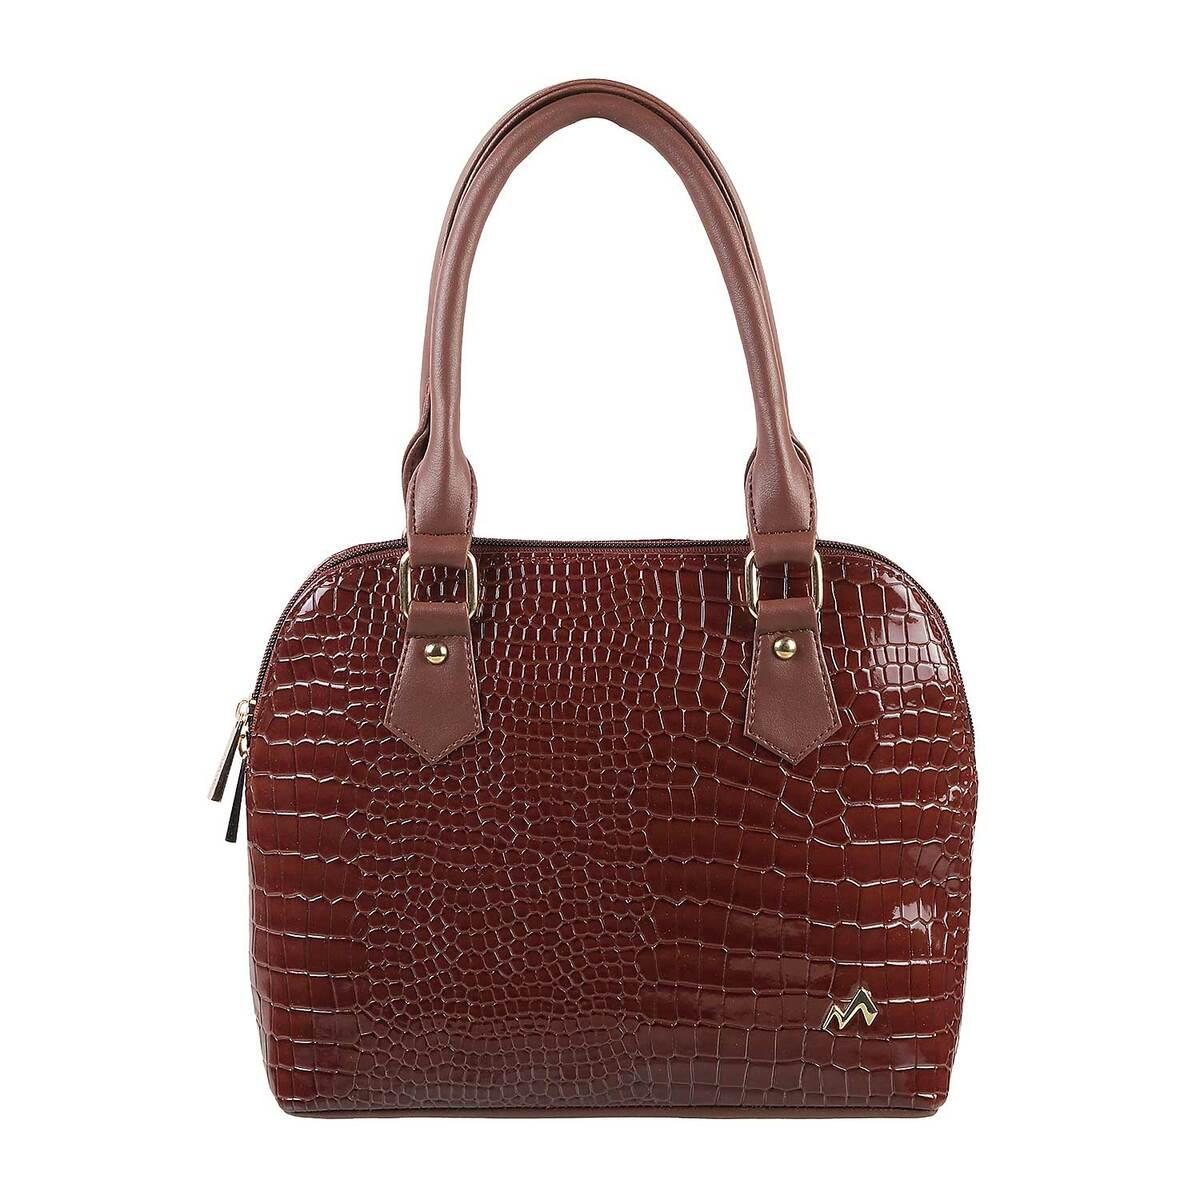 Fine Hand-Tooled Leather bags, Women, Best, Online, Buy, Anniversary – ALLE  Handbags